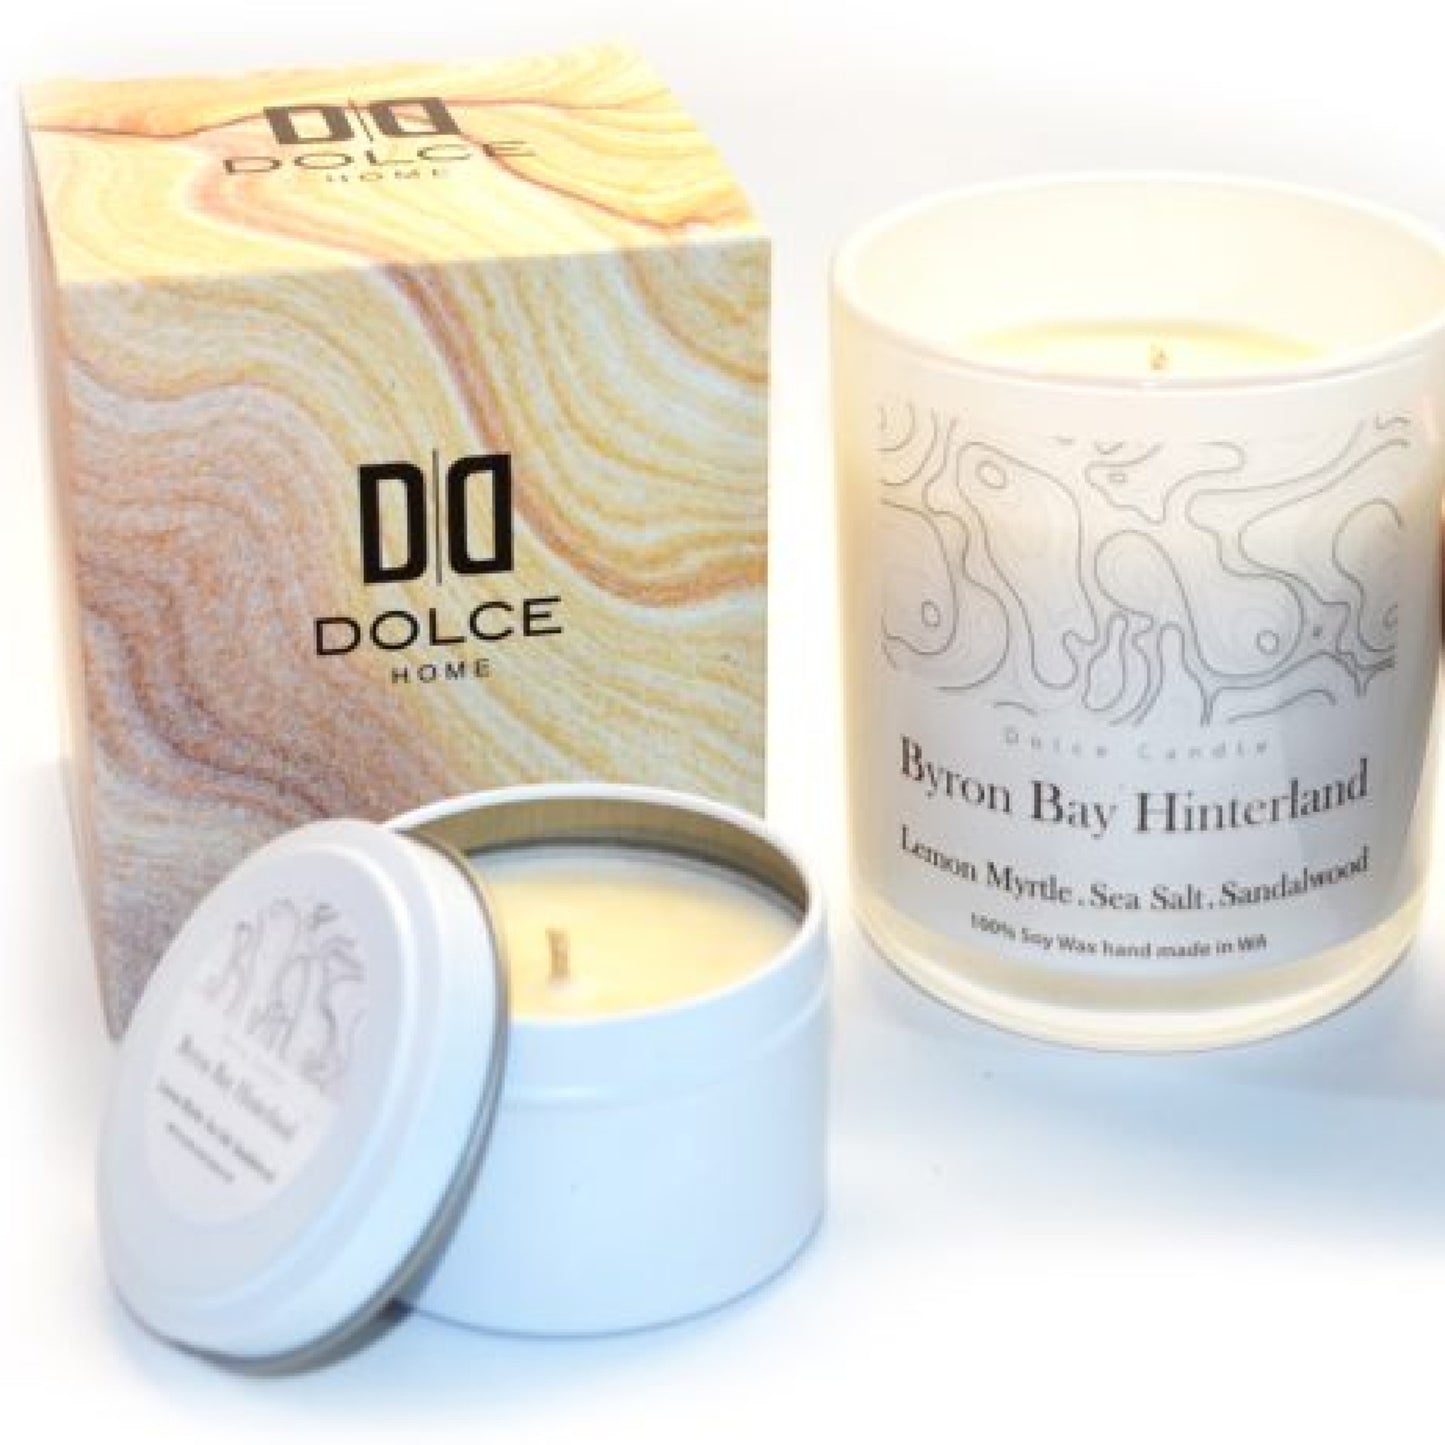 Byron Bay Hinterland | 300g Soy Wax Candle | Dolce Home | Handmade in W.A.